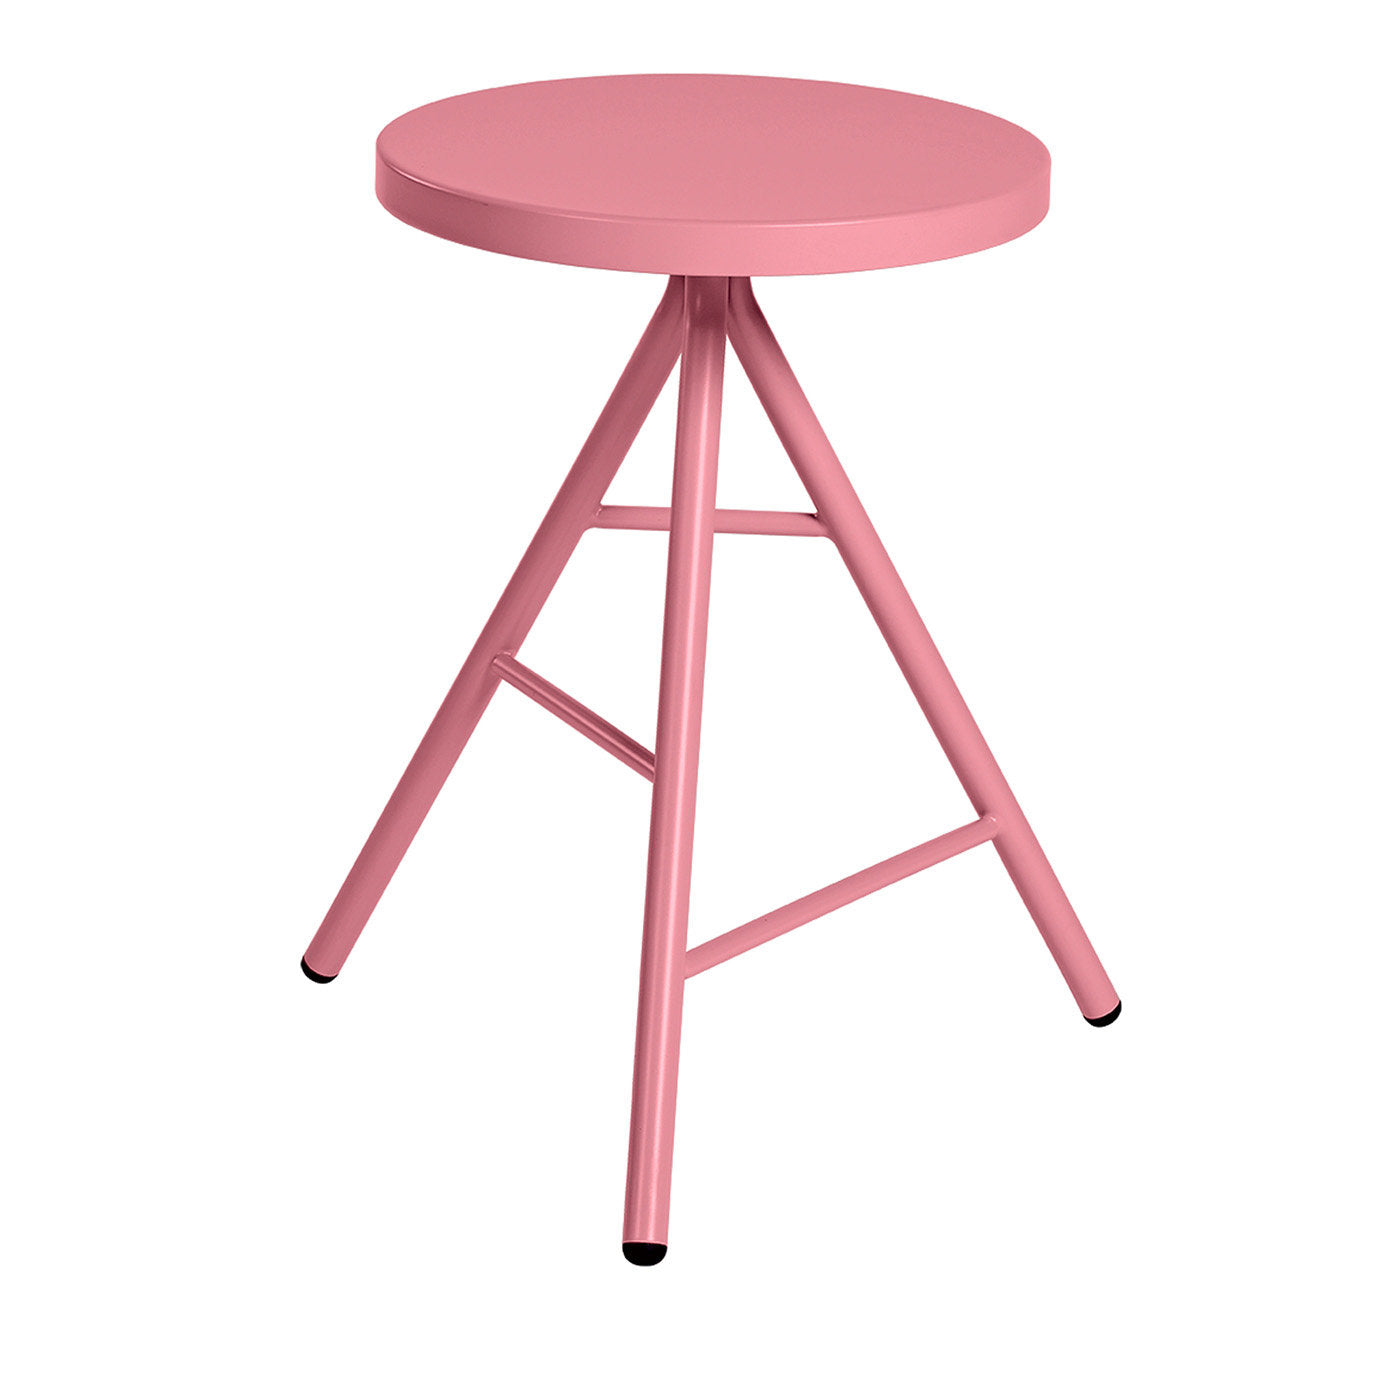 Symple Small Pink Stool - Main view